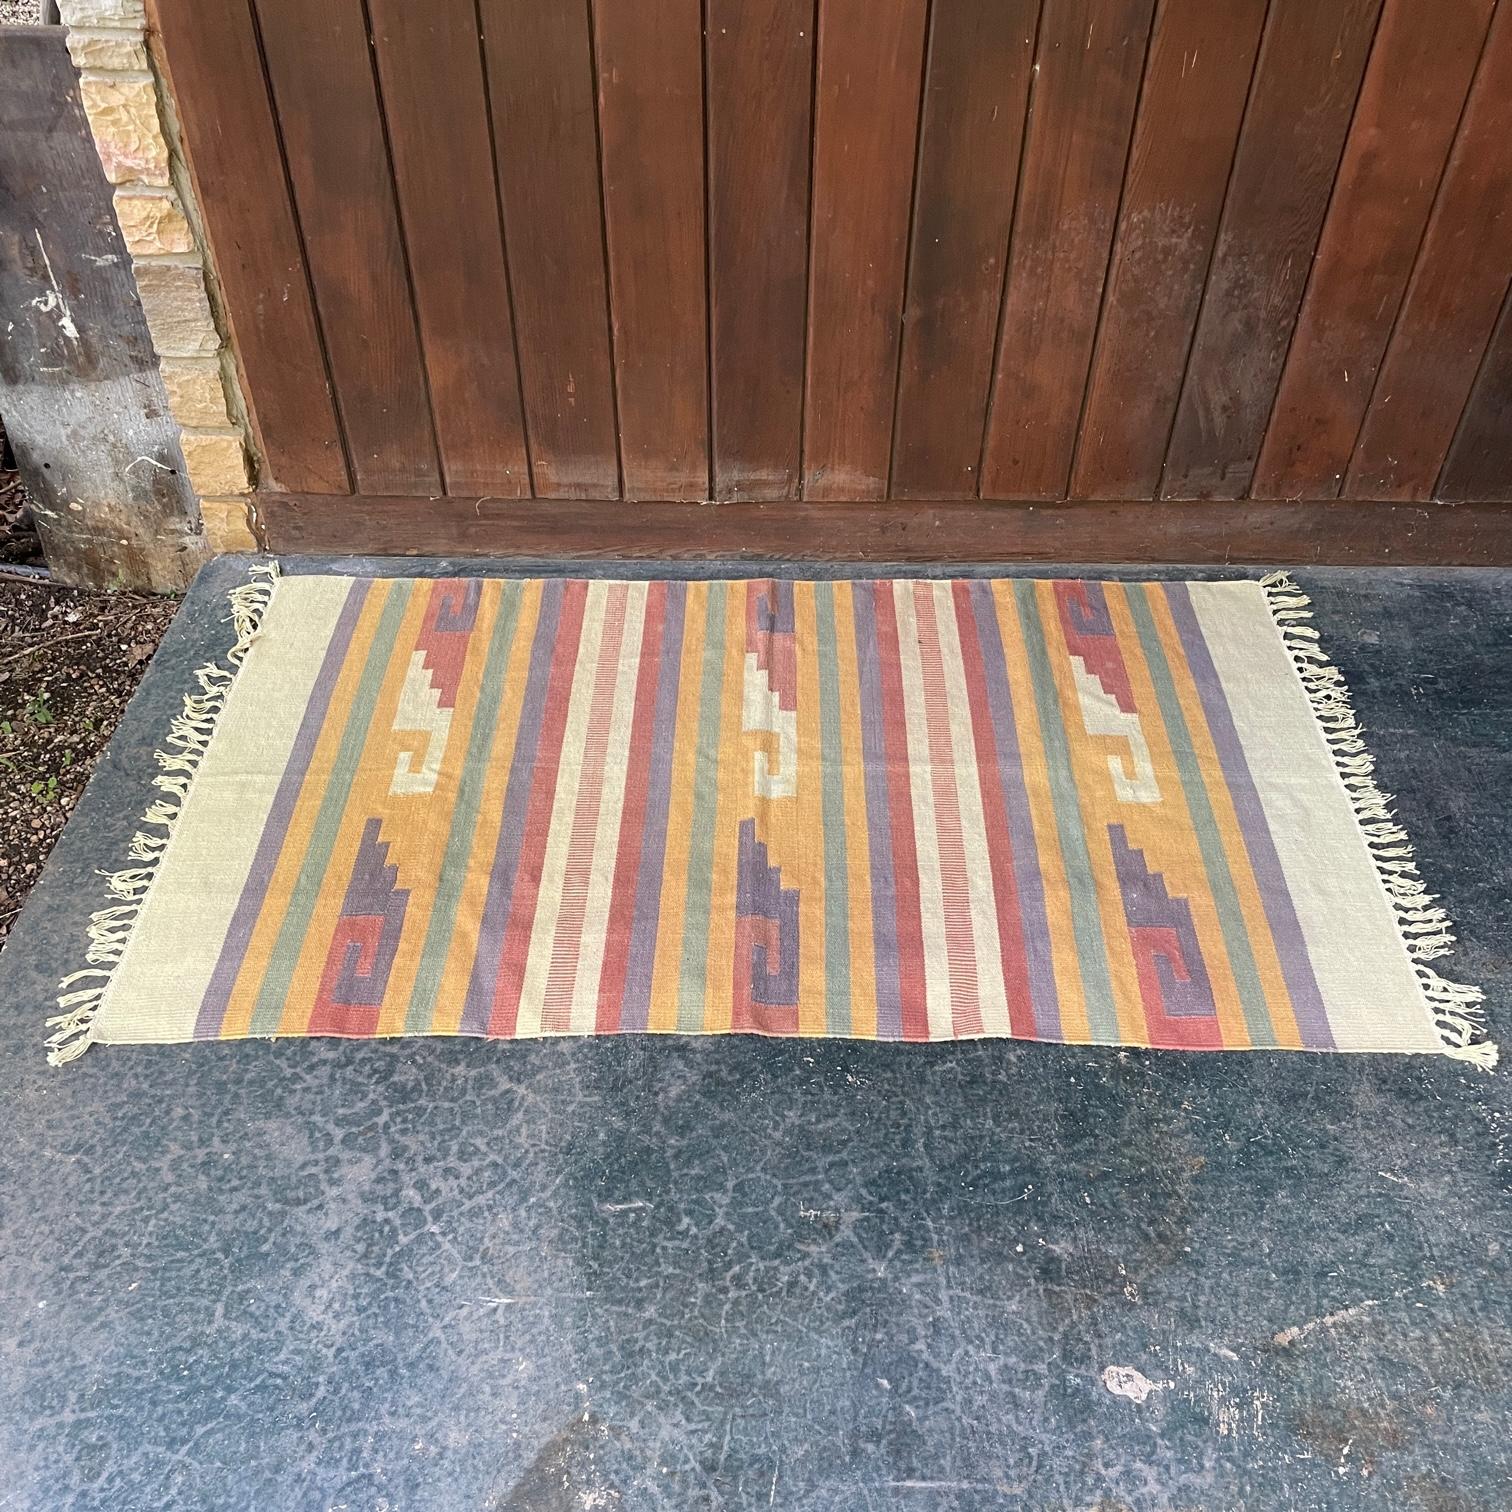 Supple, thin, and very smooth woven wool. A very calming palette of light earth tones. Estate fresh, a very well kept 1960s southwestern souvenir rug.